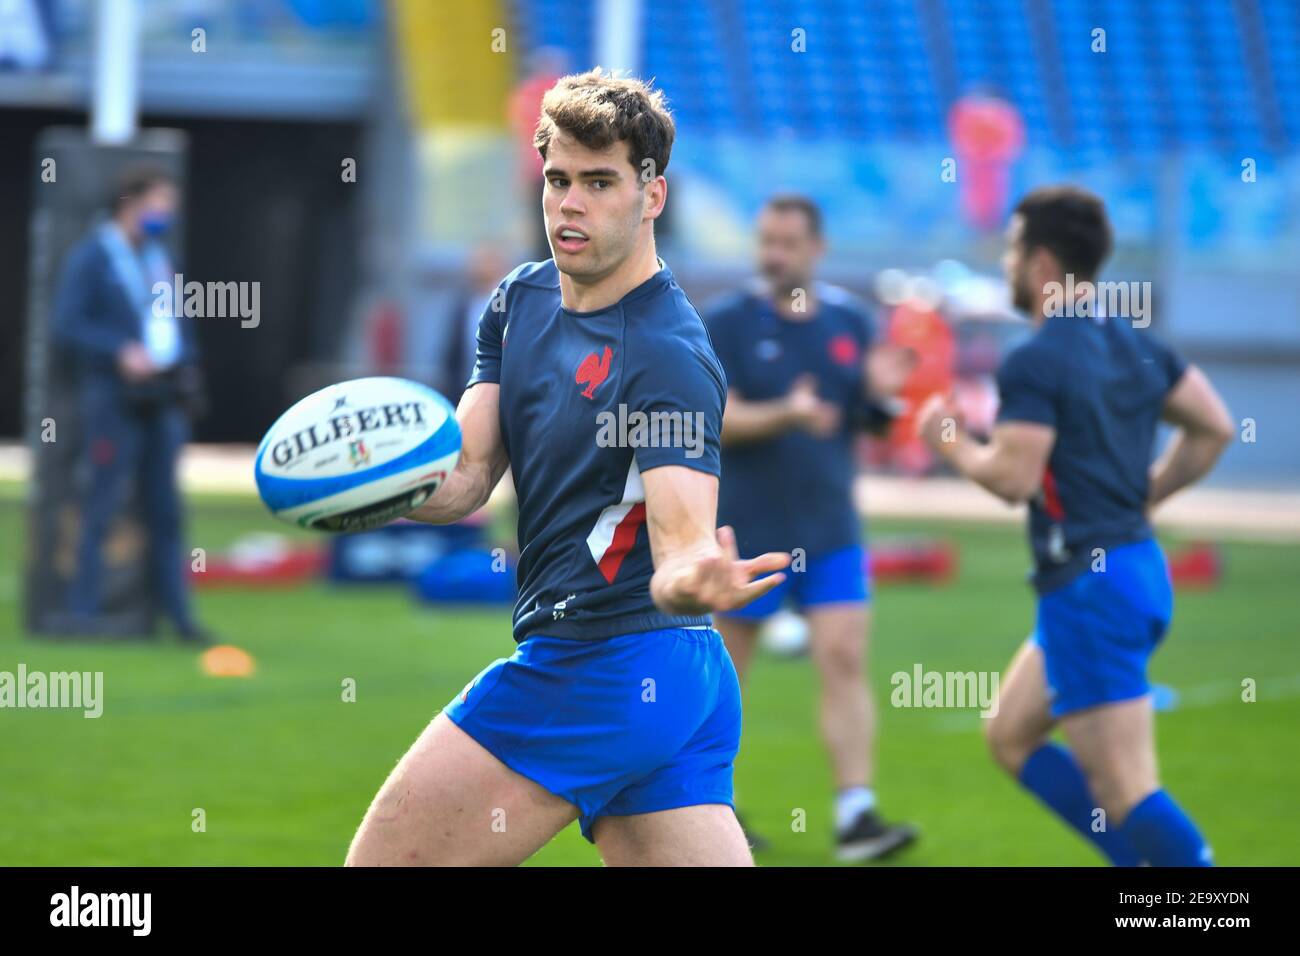 Rome, Italy. 6th Feb, 2021. Rome, Italy, Stadio Olimpico, February 06, 2021, Matthieu Jalibert (France) during Italy vs France - Rugby Six Nations match Credit: Carlo Cappuccitti/LPS/ZUMA Wire/Alamy Live News Stock Photo